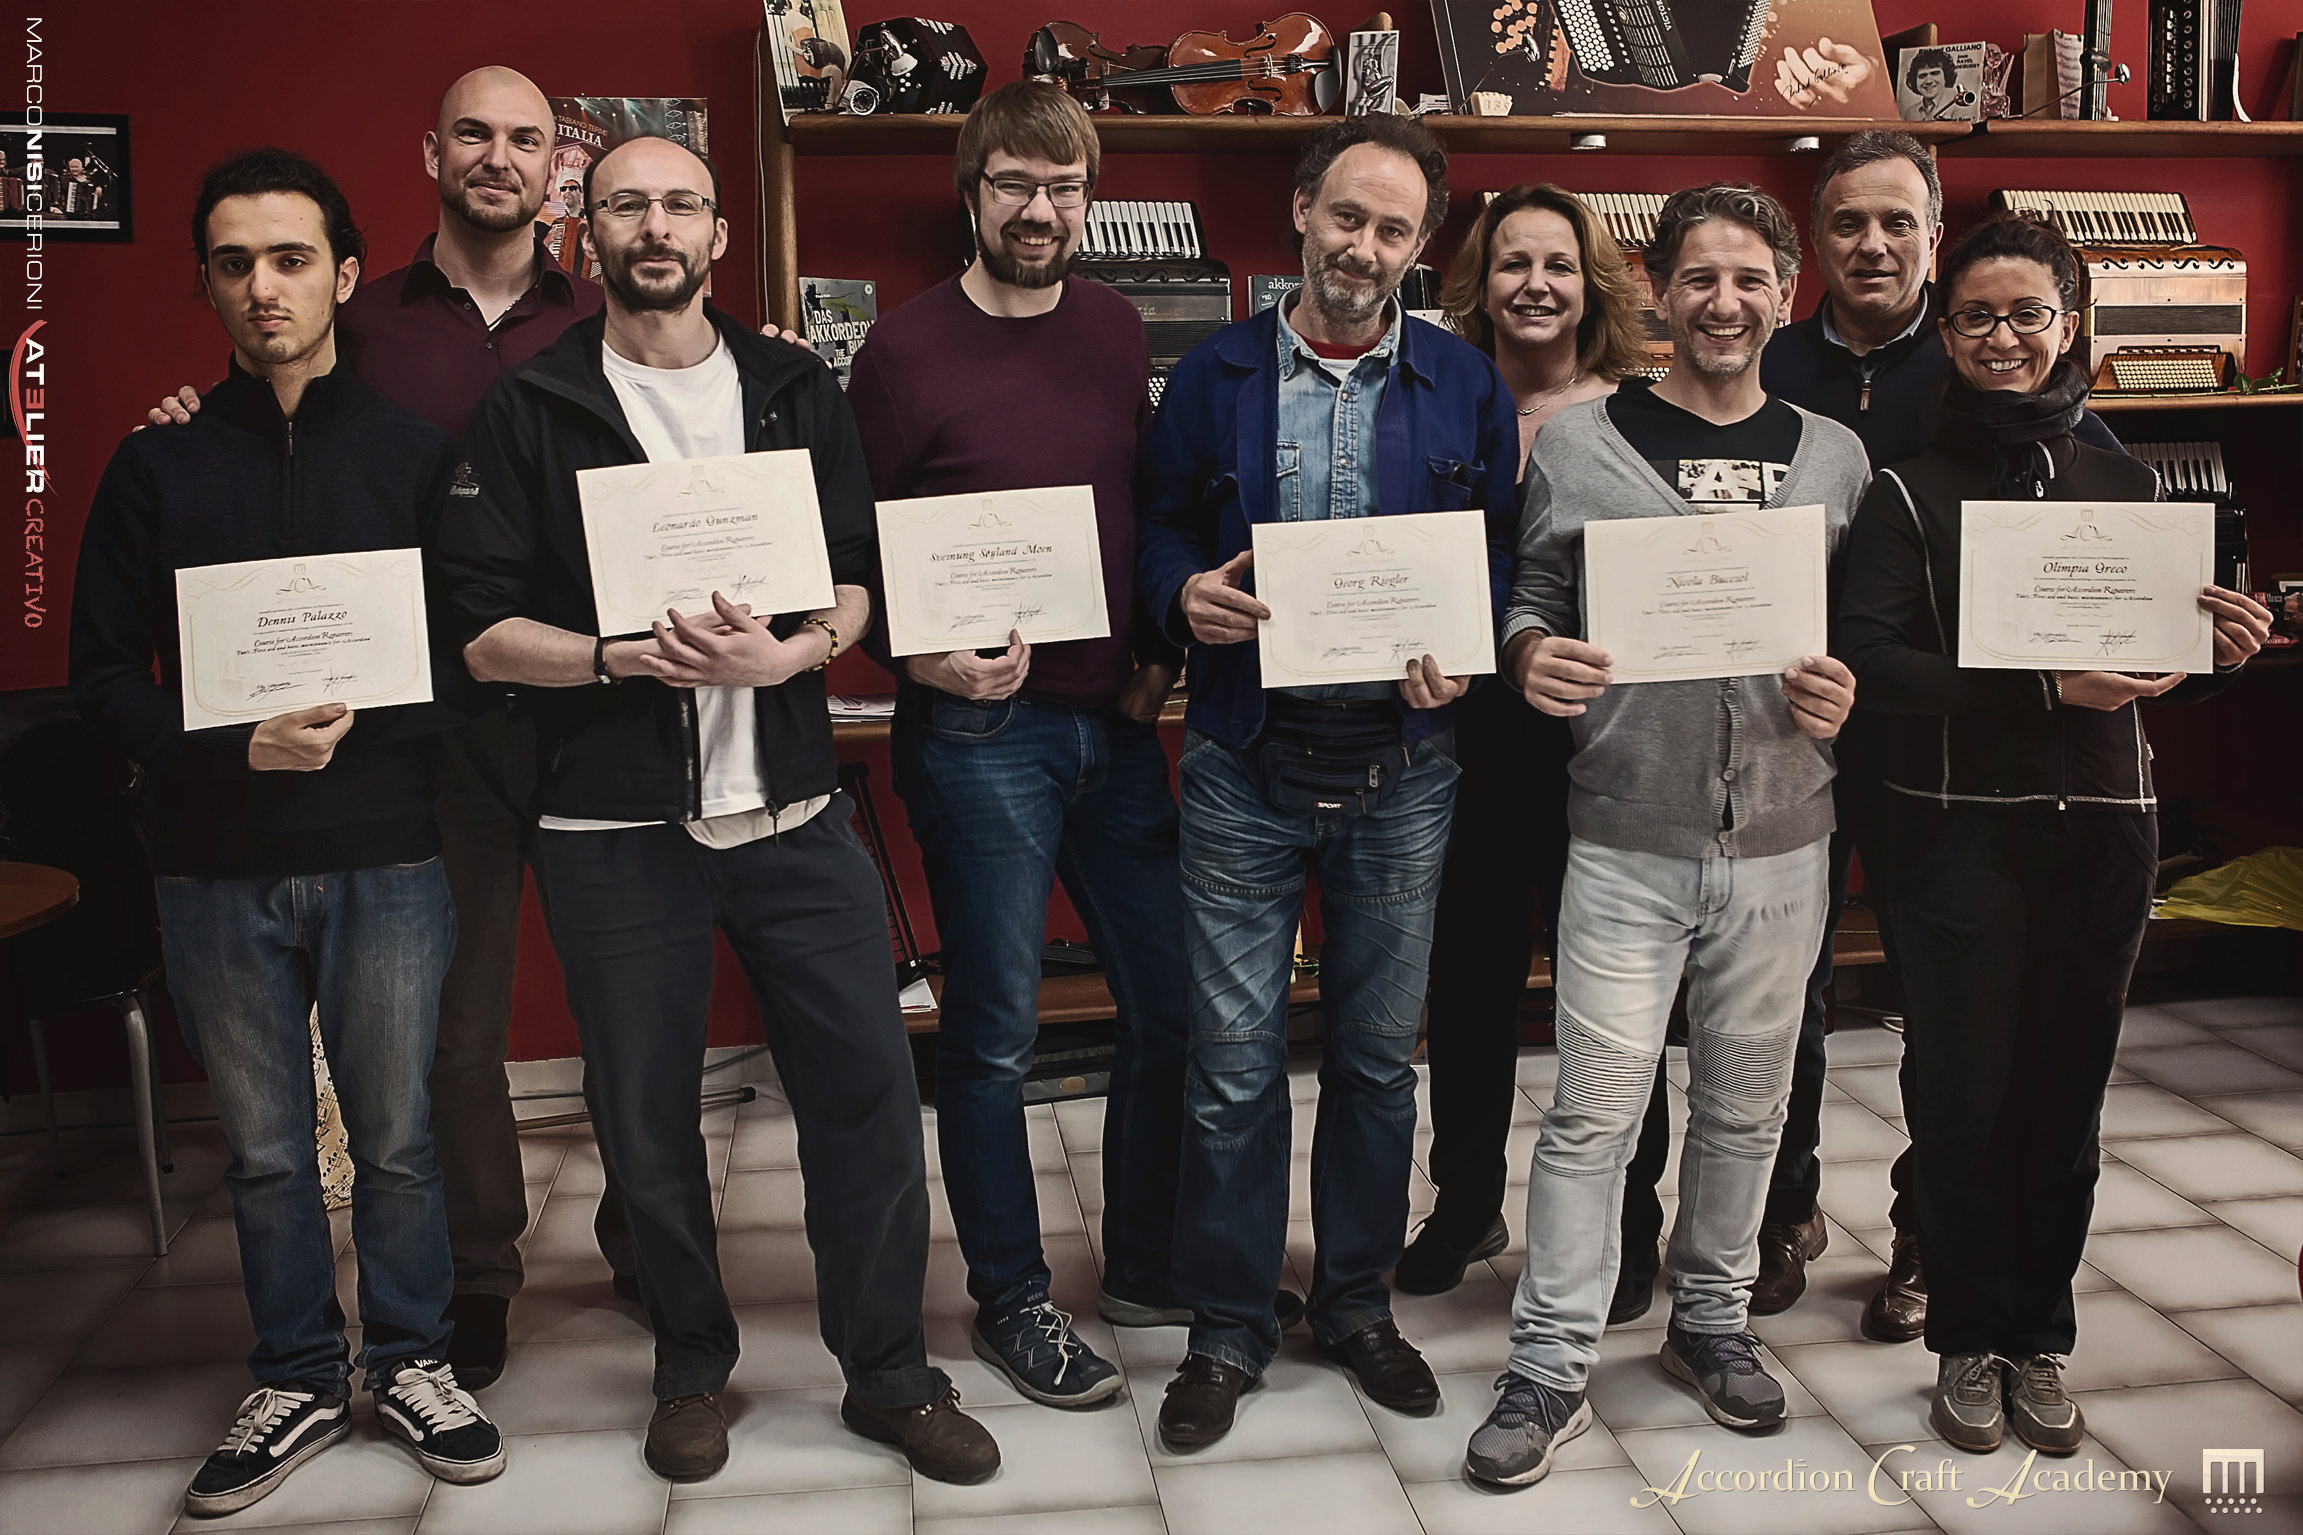 Course for Accordion Repairers, Tier 1, April 2019